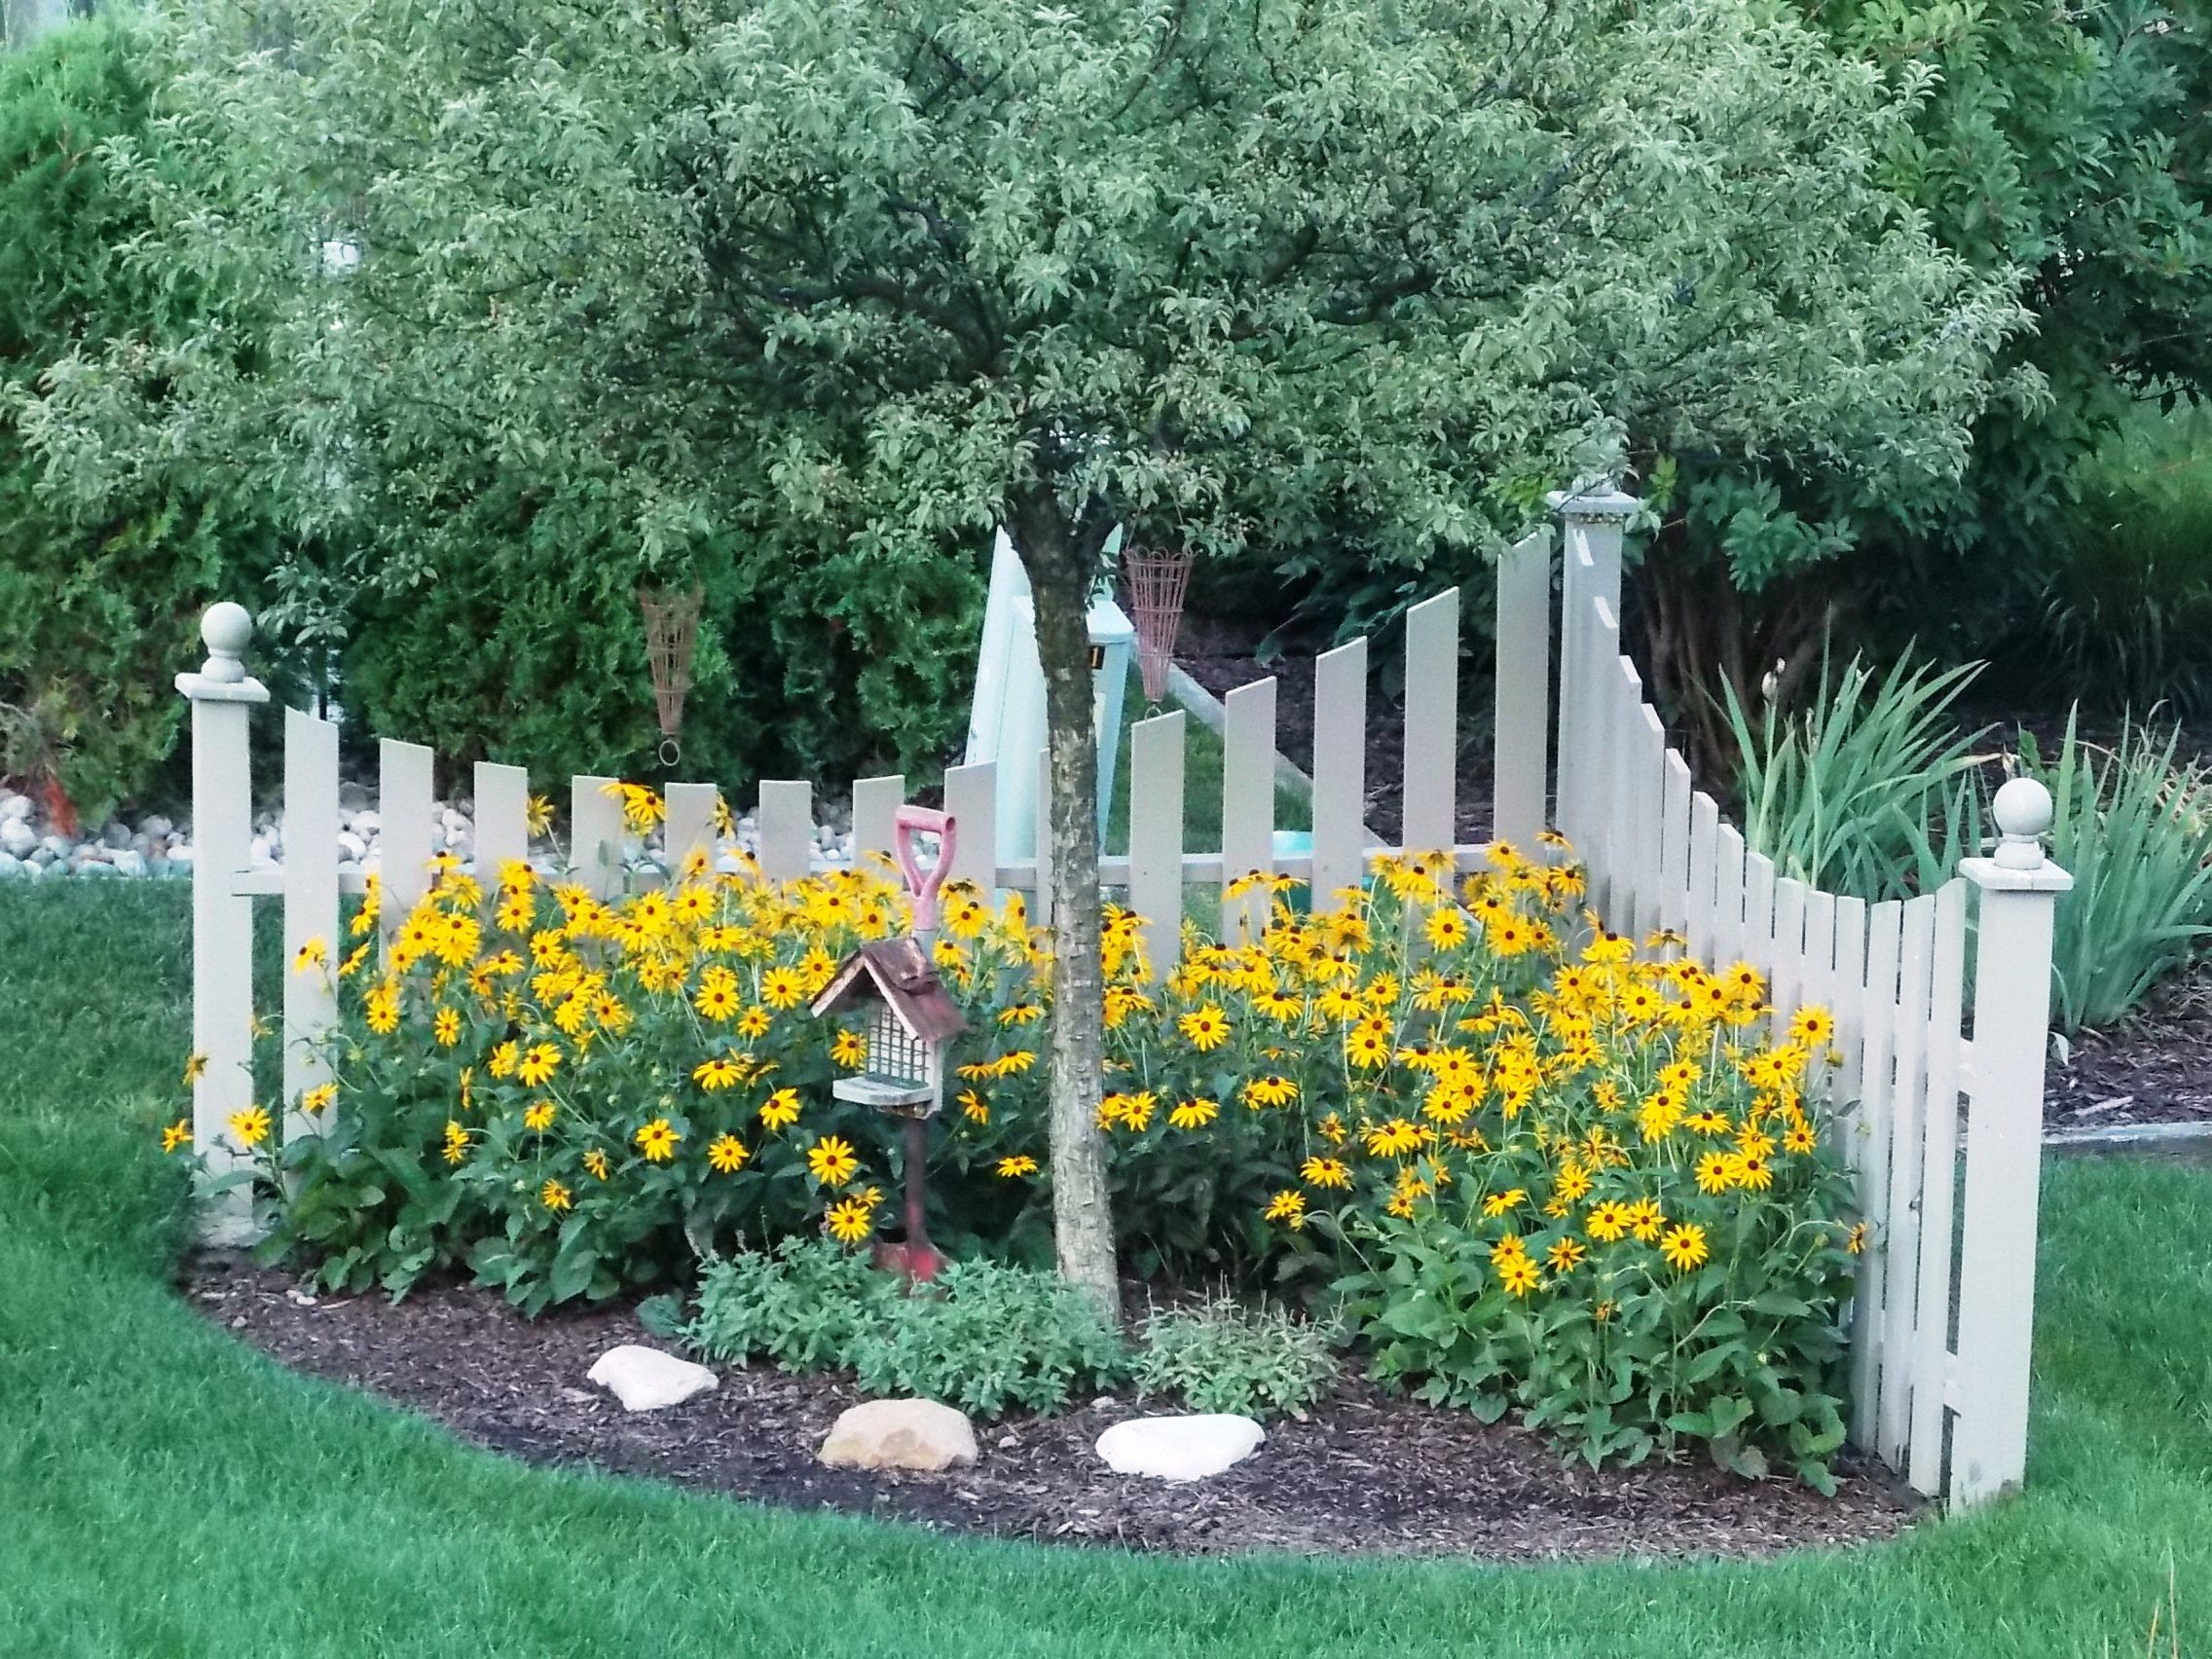 Corner Fence I Built A Few Years Ago Now With Black Eyed Susans In intended for size 2272 X 1704